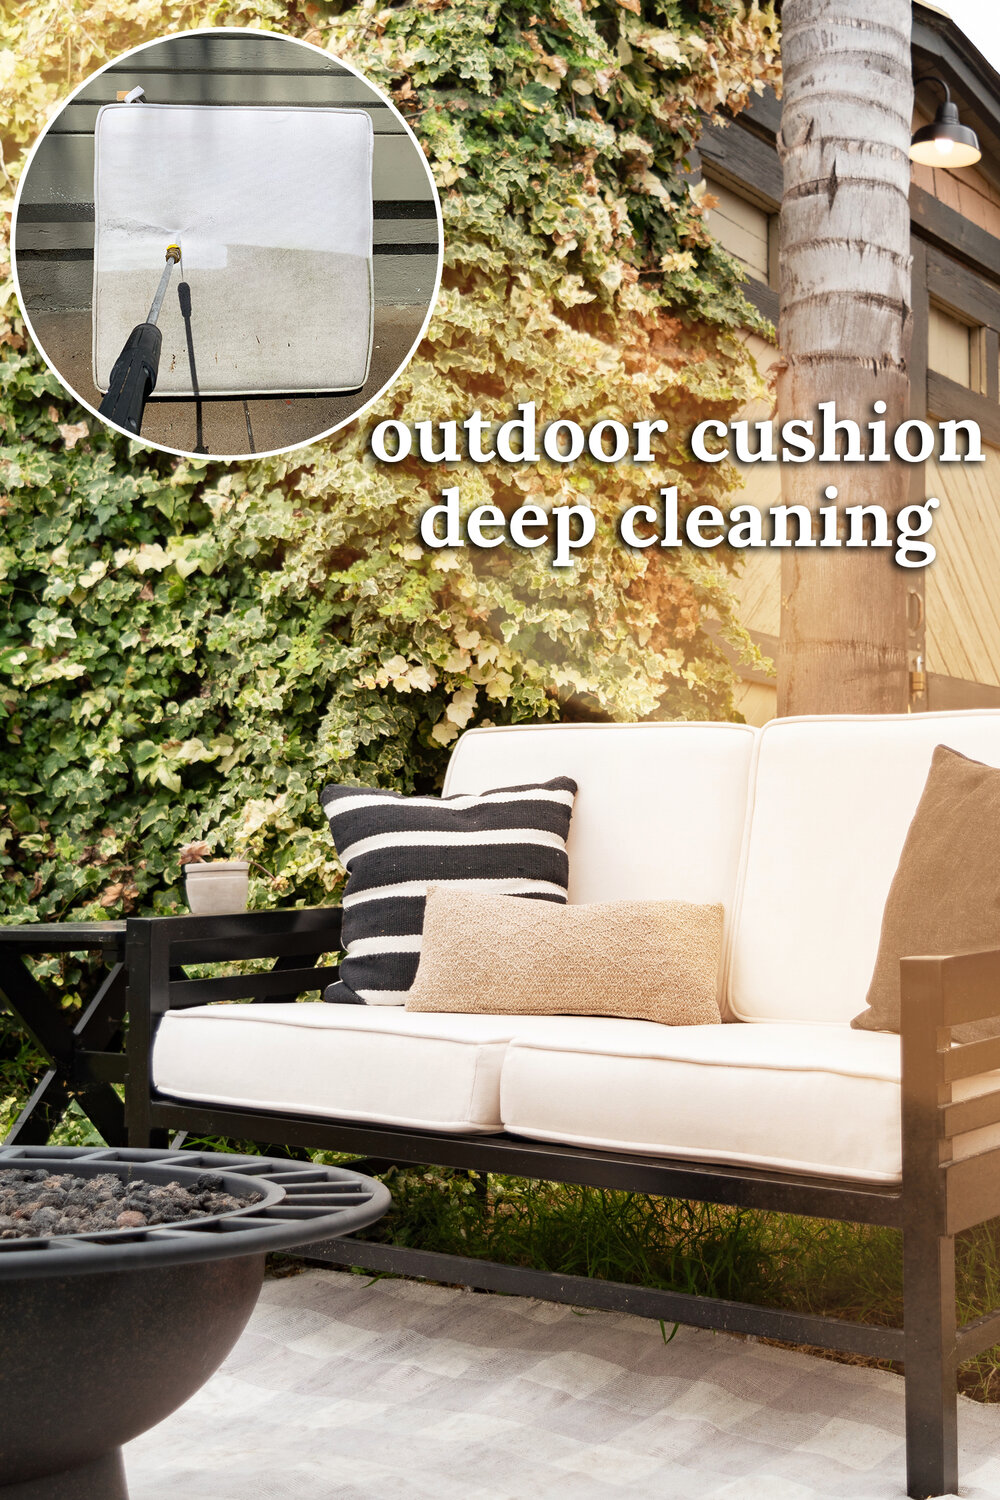 Pressure Washing My Outdoor Cushions, How Do I Wash Outdoor Cushion Covers